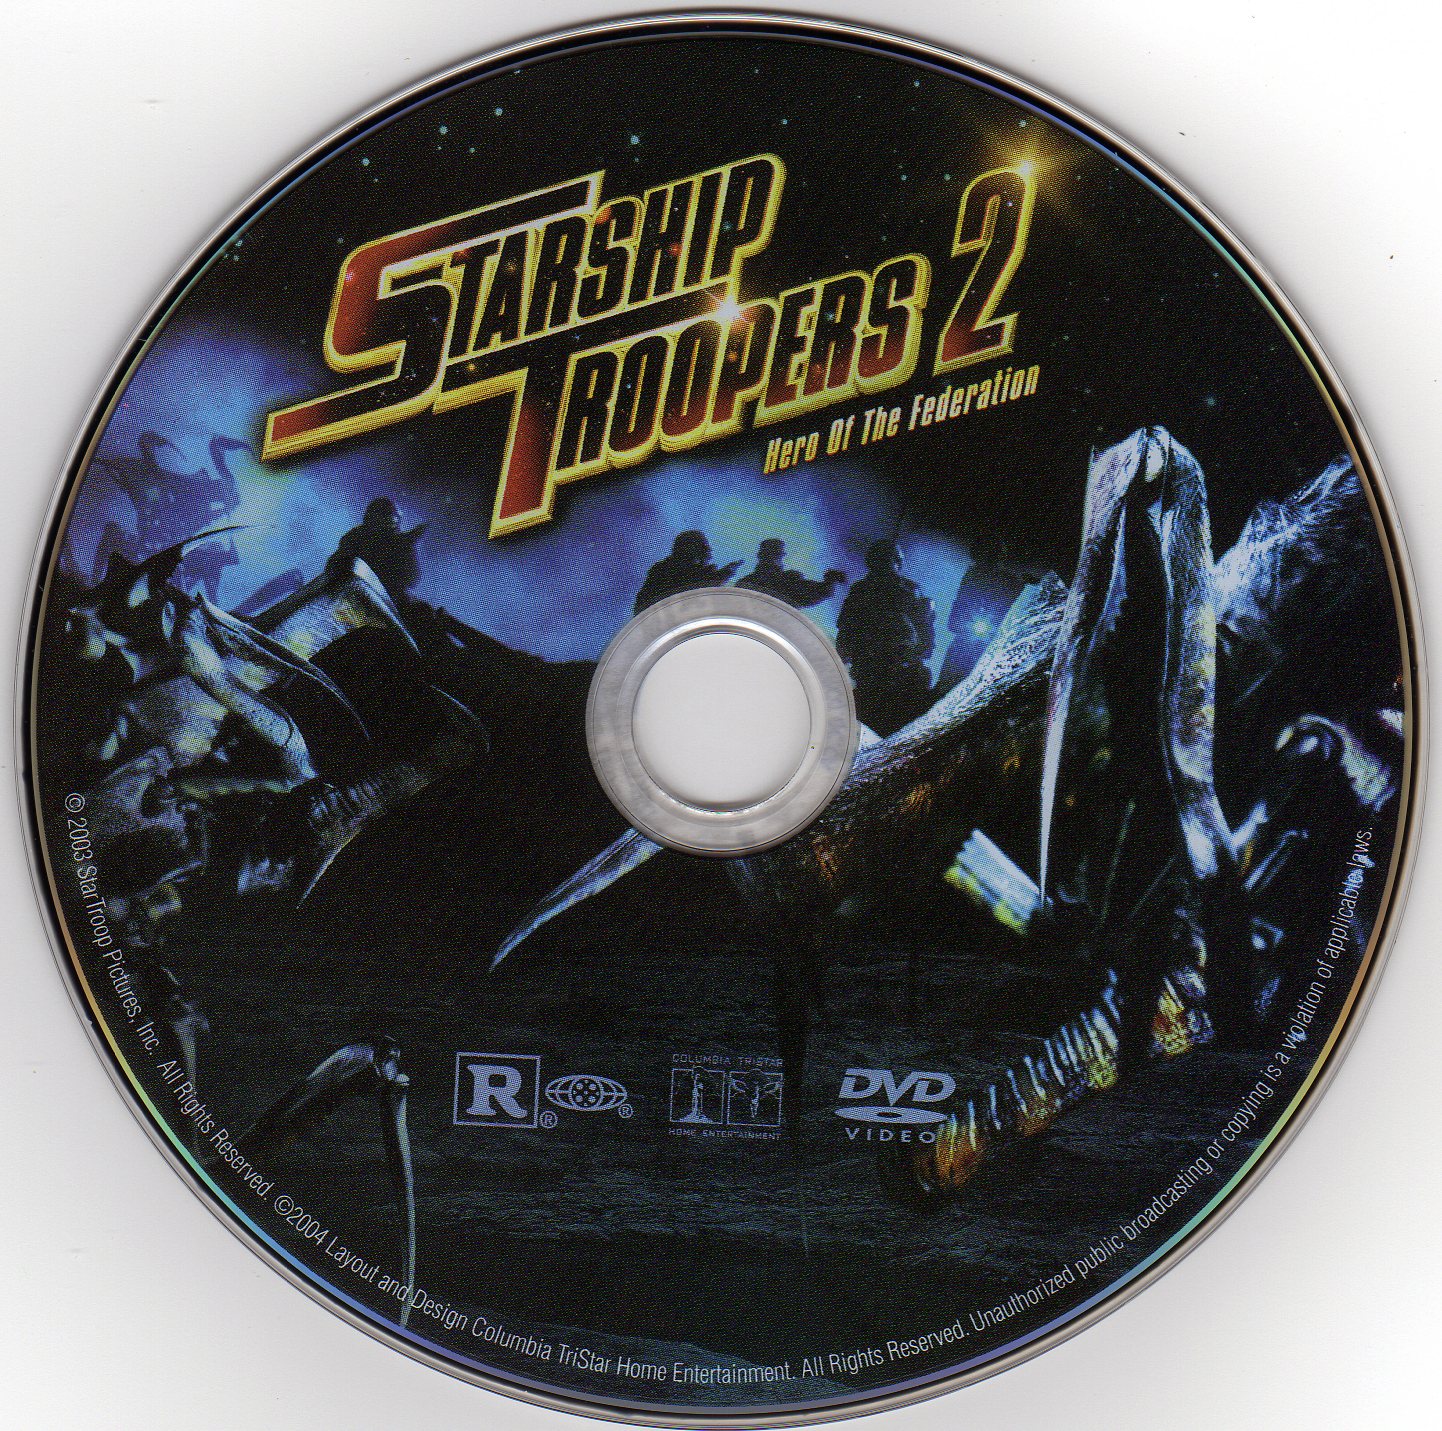 Starship troopers 2